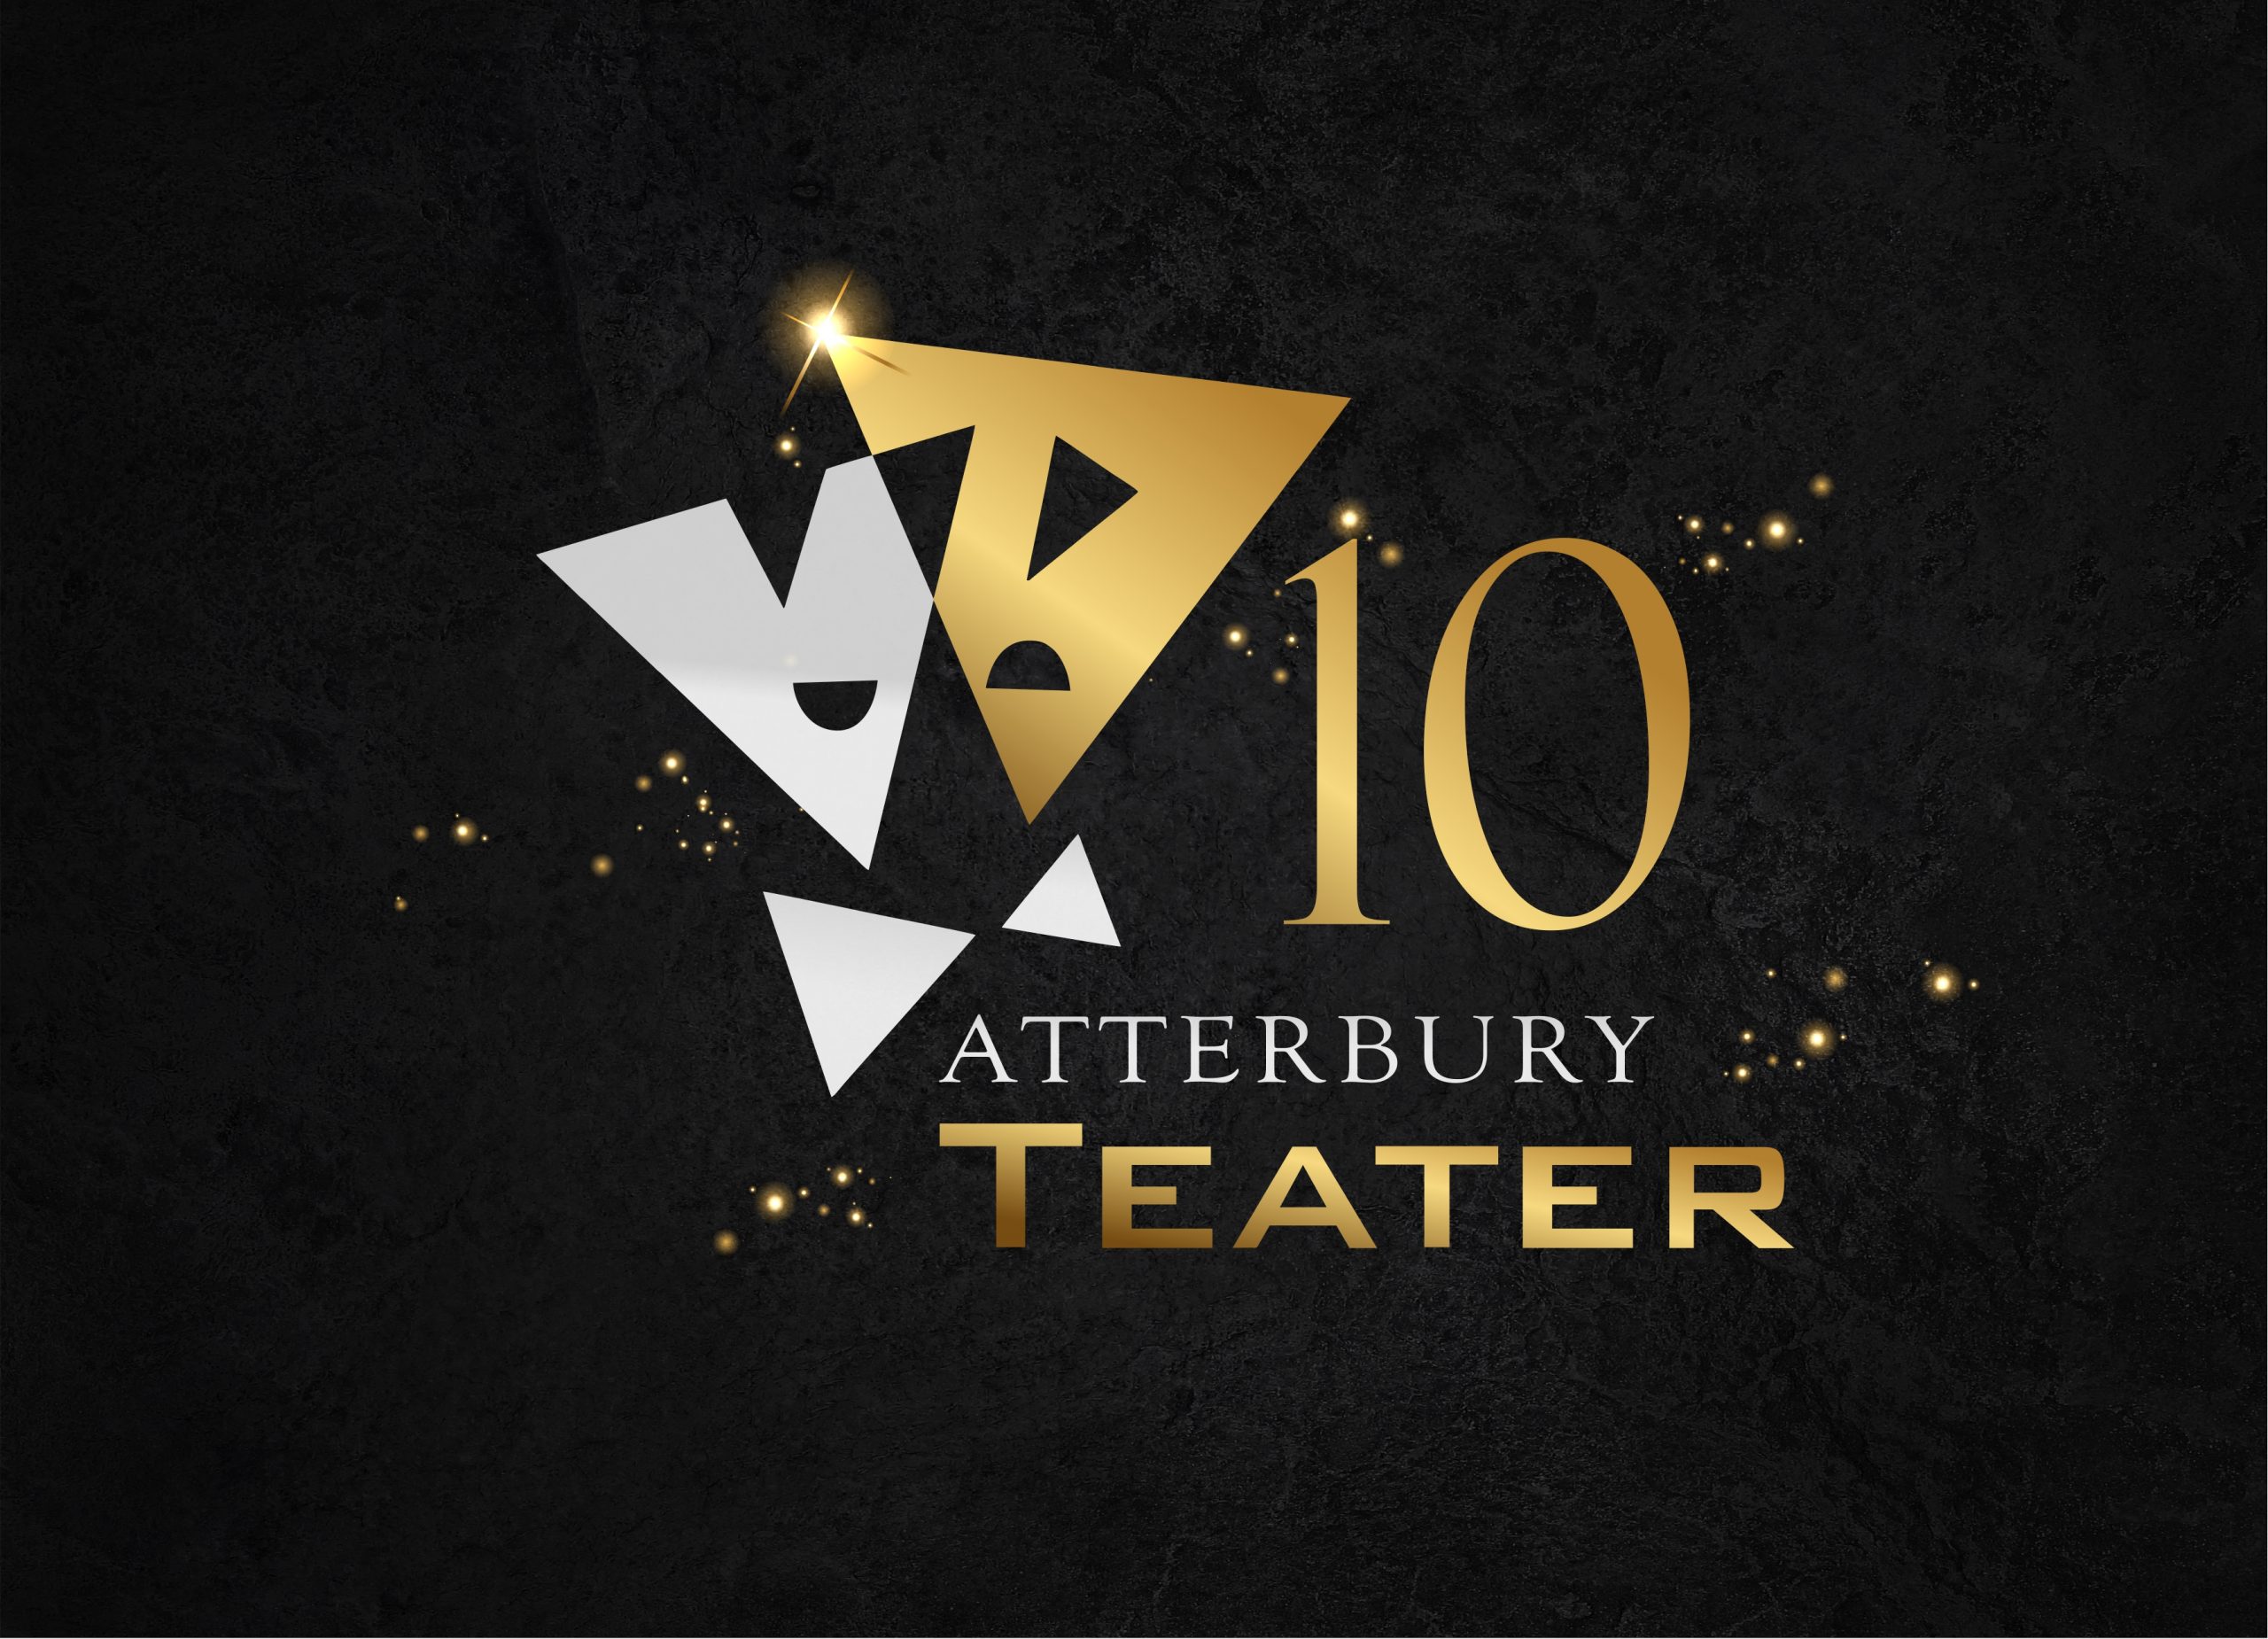 The Atterbury Theatre: A Decade Of Art